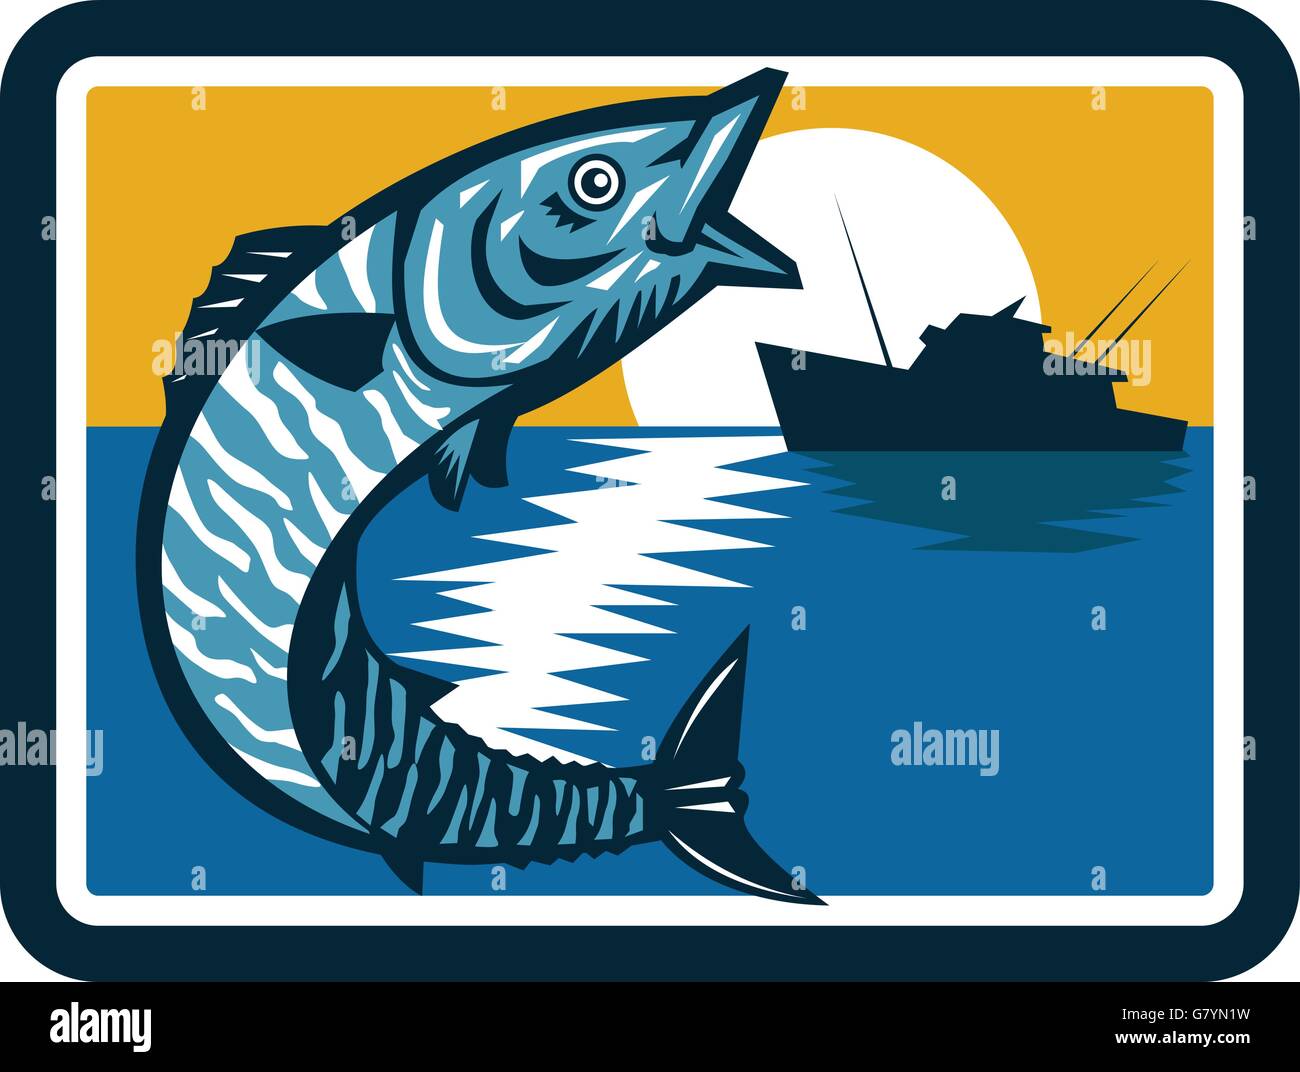 Illustration of a wahoo , Acanthocybium solandri, a scombrid fish jumping up with sea and fishing boat in the background set inside square shape done in retro style. Stock Vector